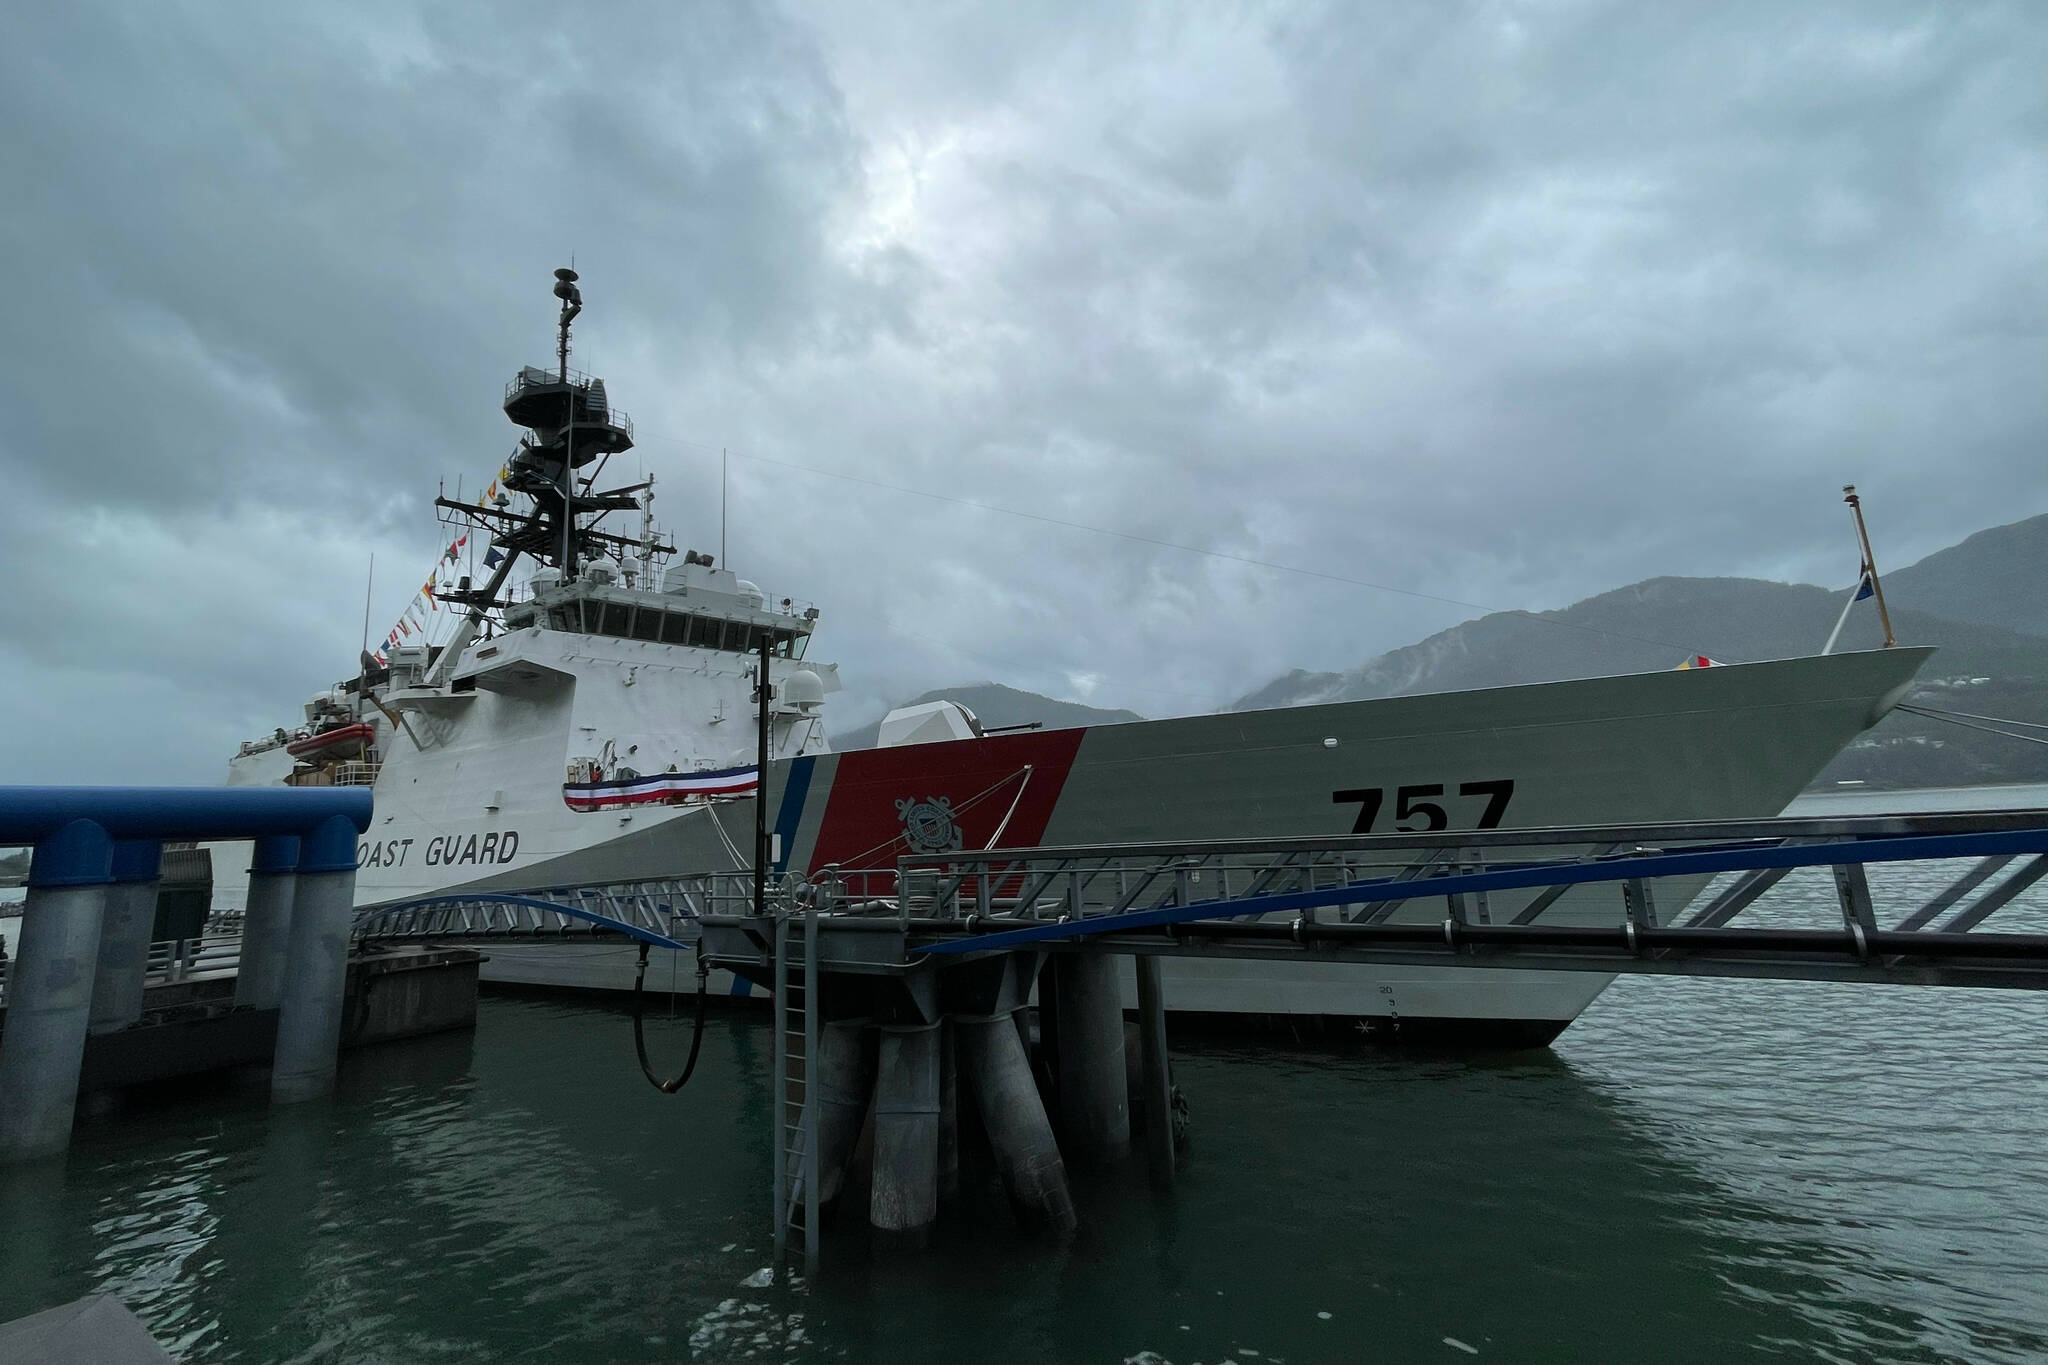 Michael S. Lockett / Juneau Empire
The U.S. Coast Guard is seeking to increase recruitment numbers after a pandemic-induced drop left the expanding service understrength.